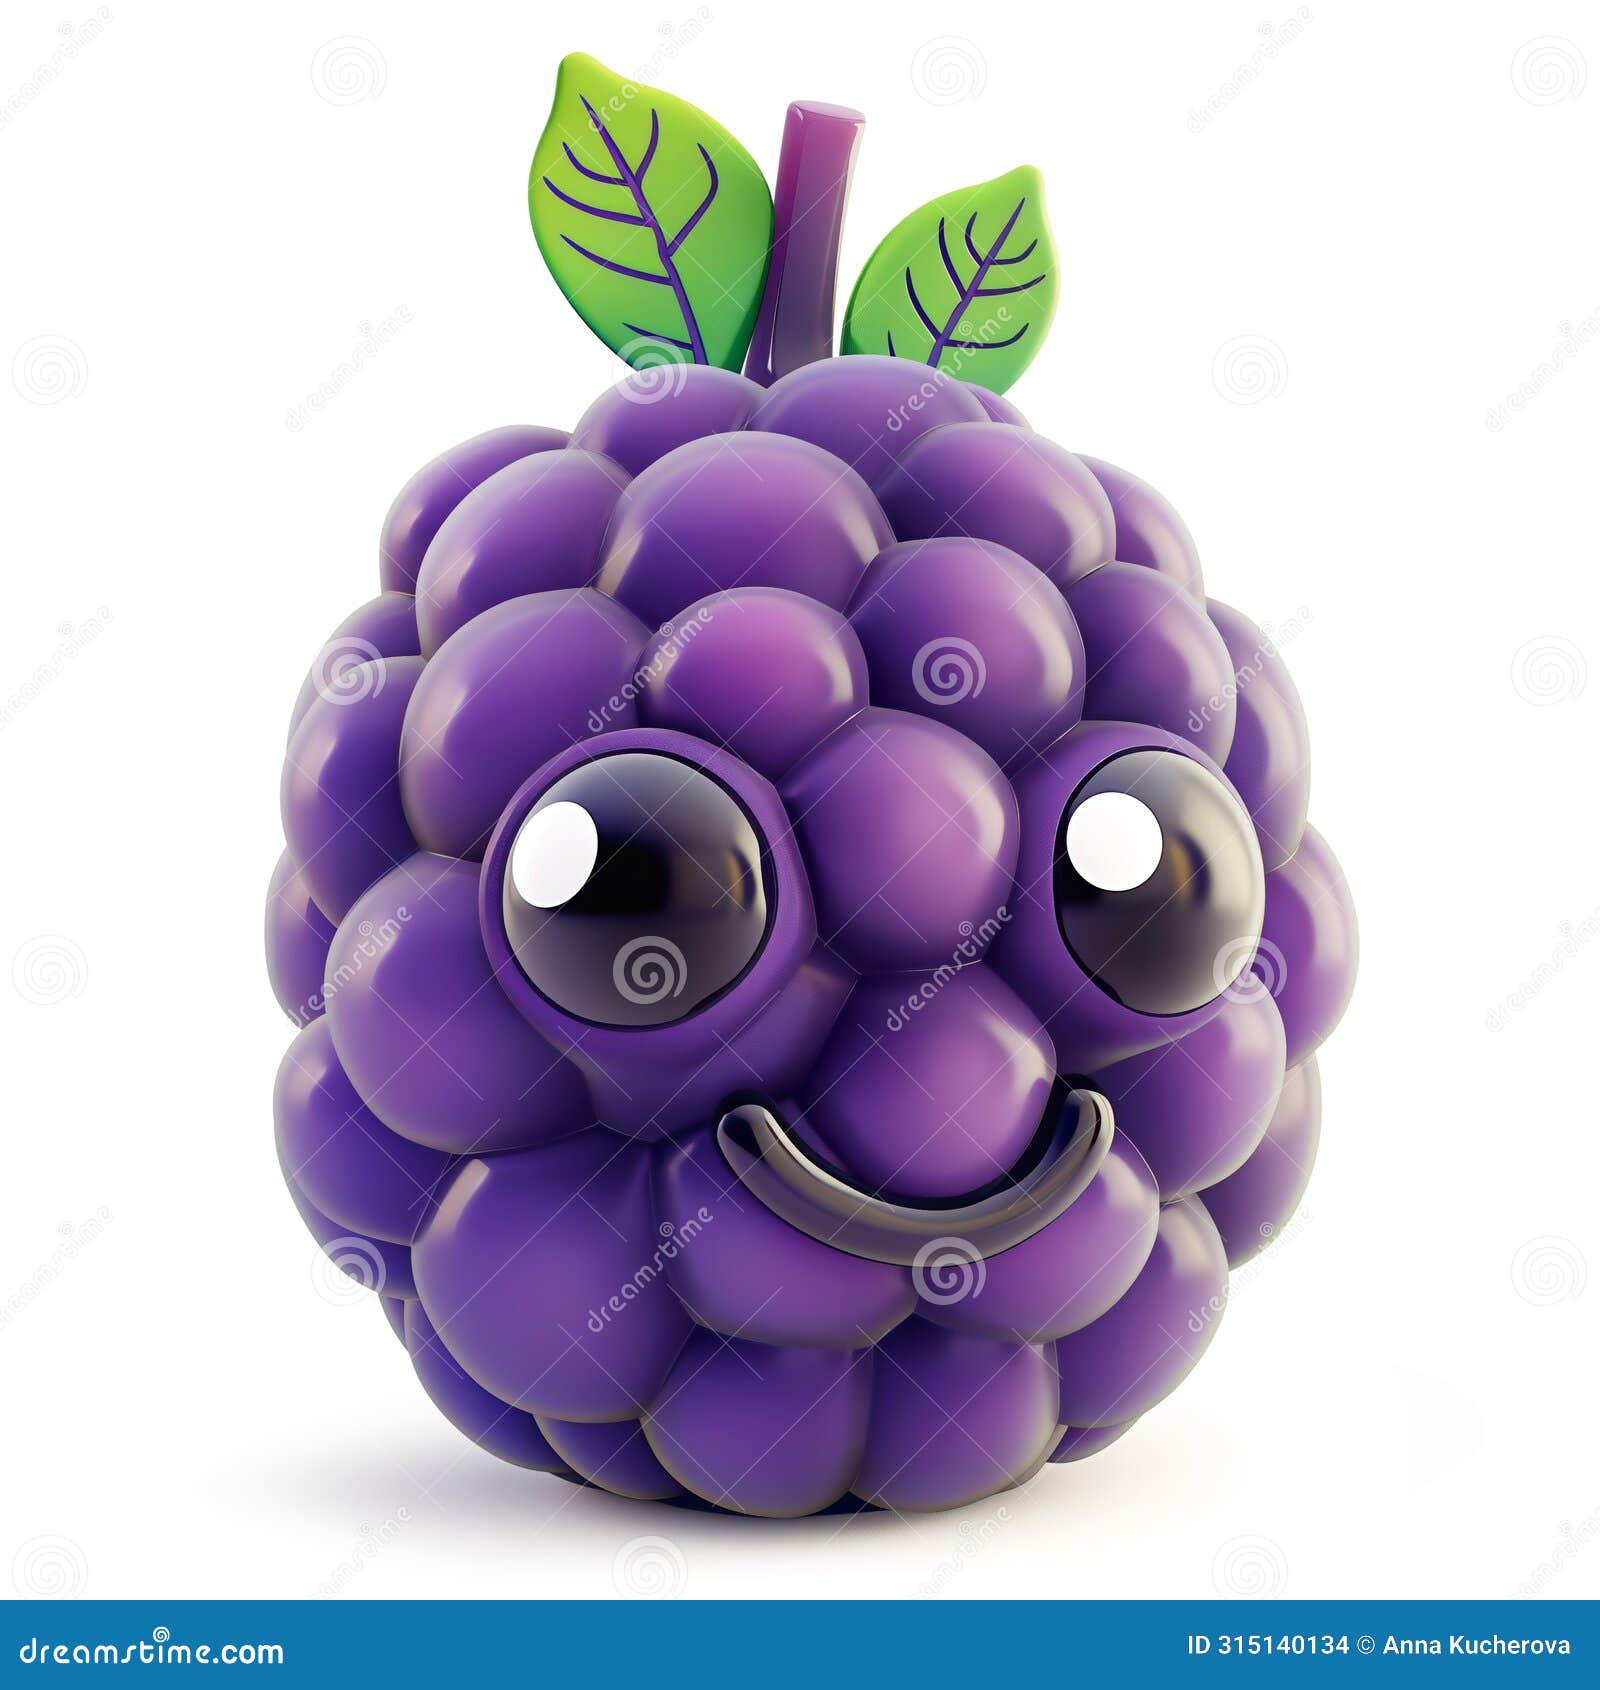 joyful blackberry character with a cute smile